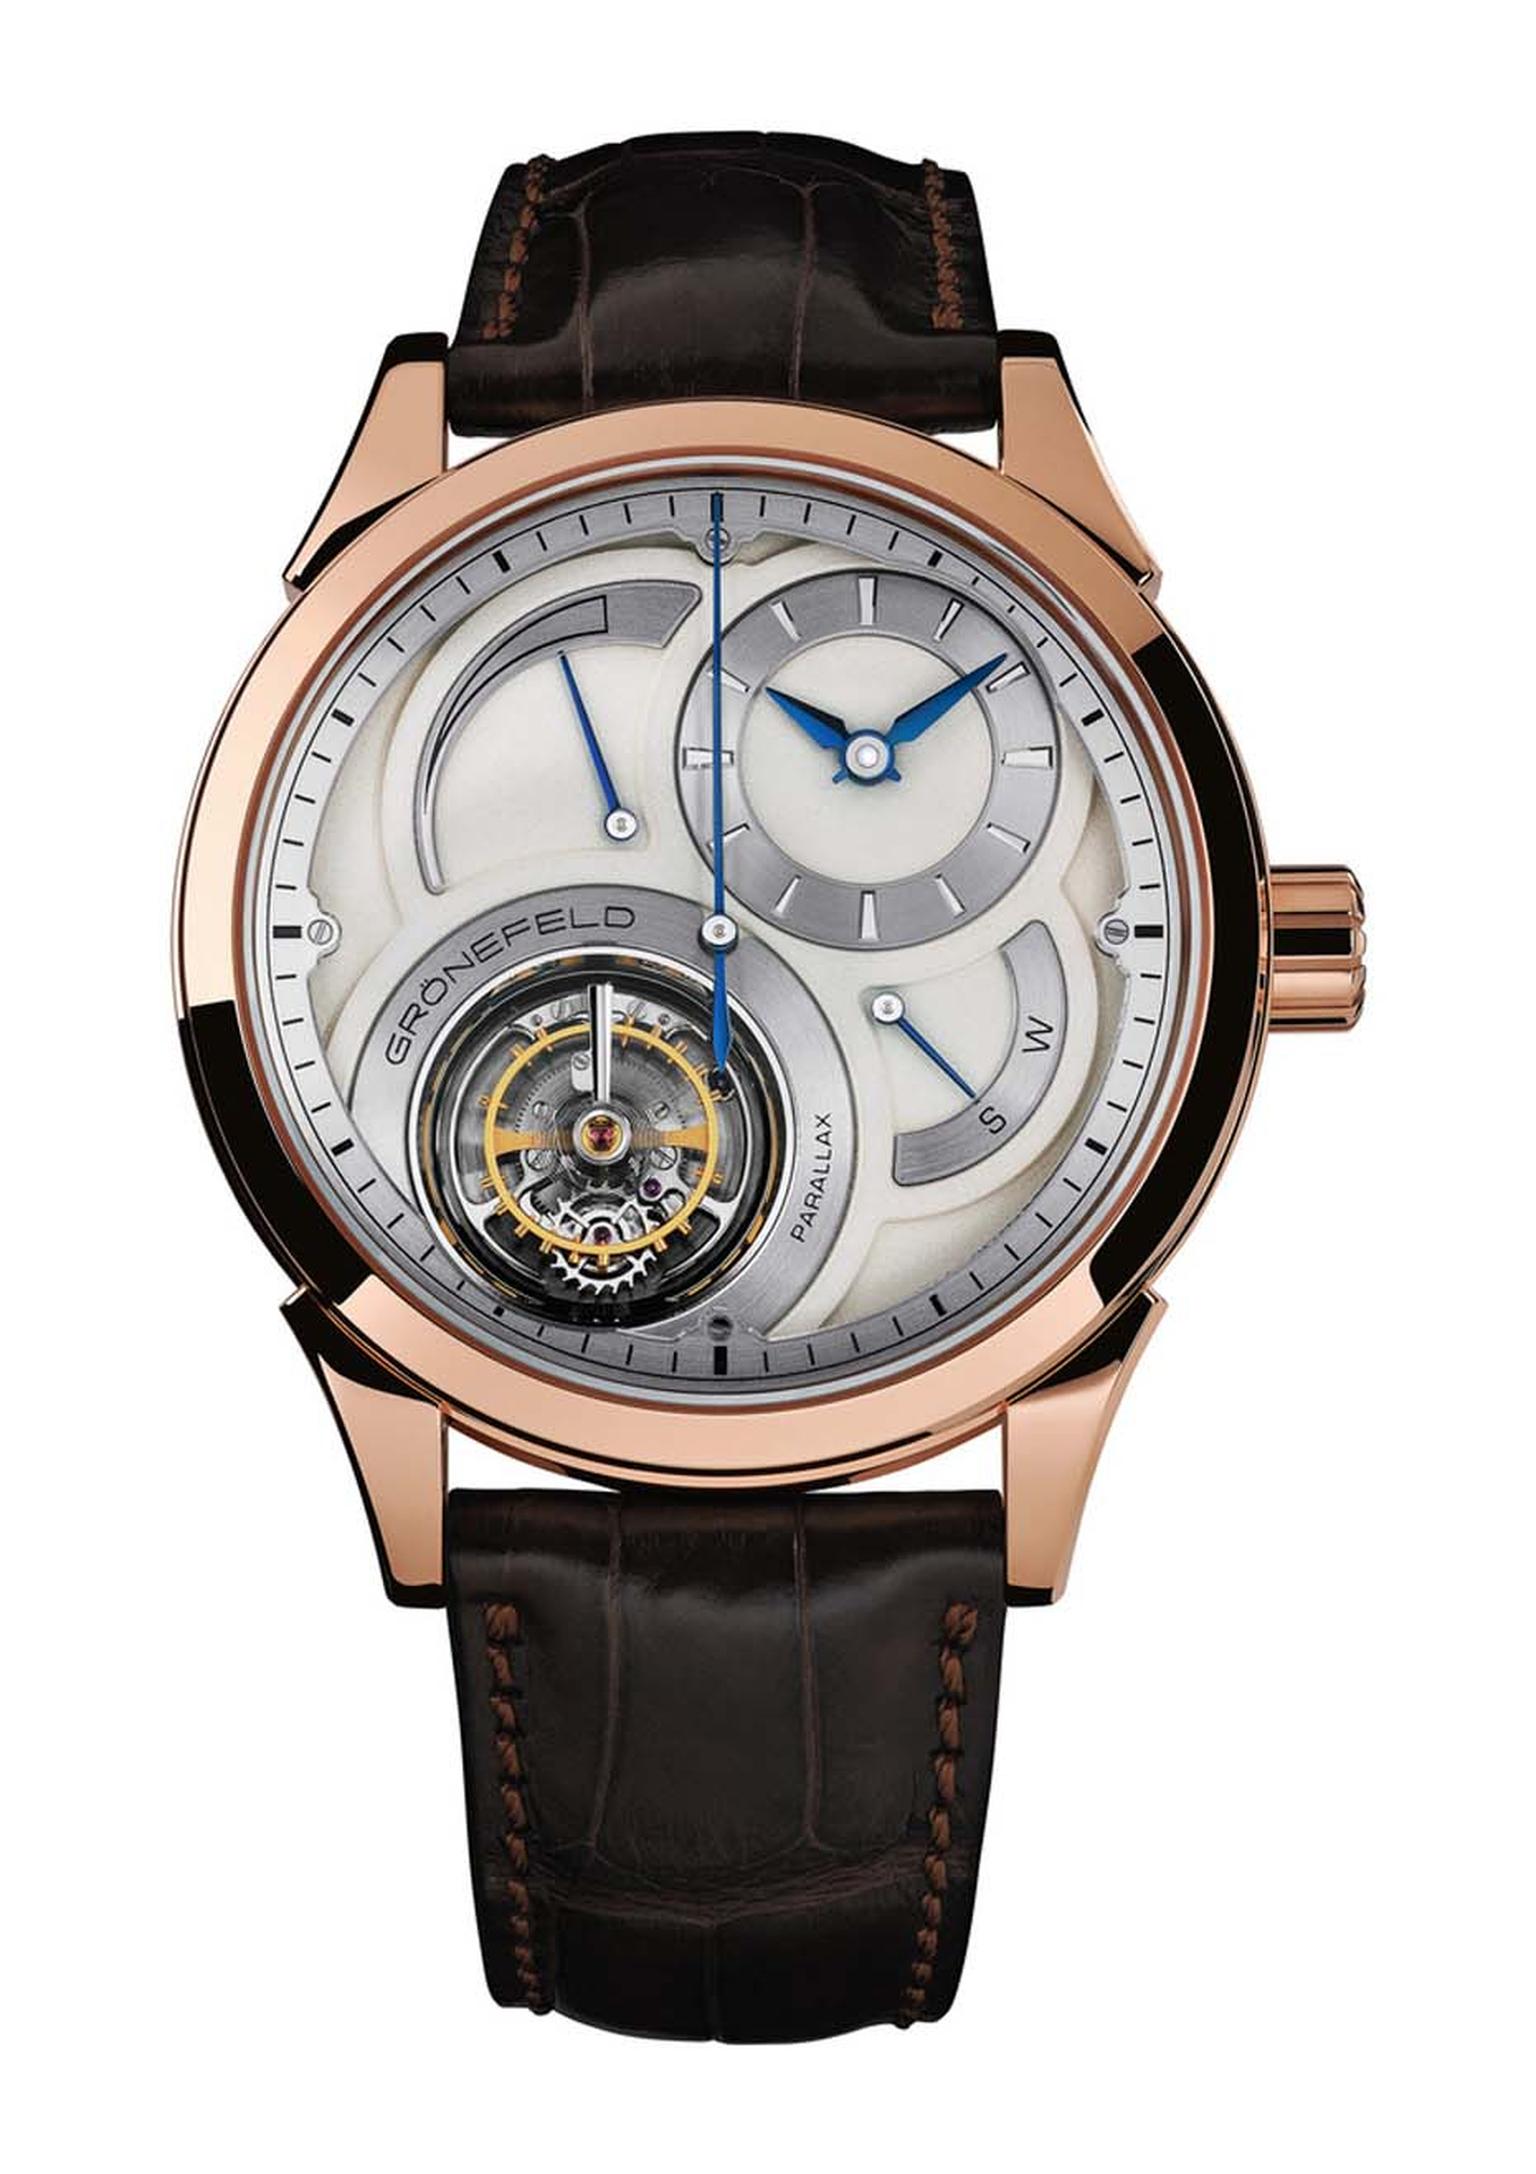 GPHG watch awards: Swatch Group steals the show